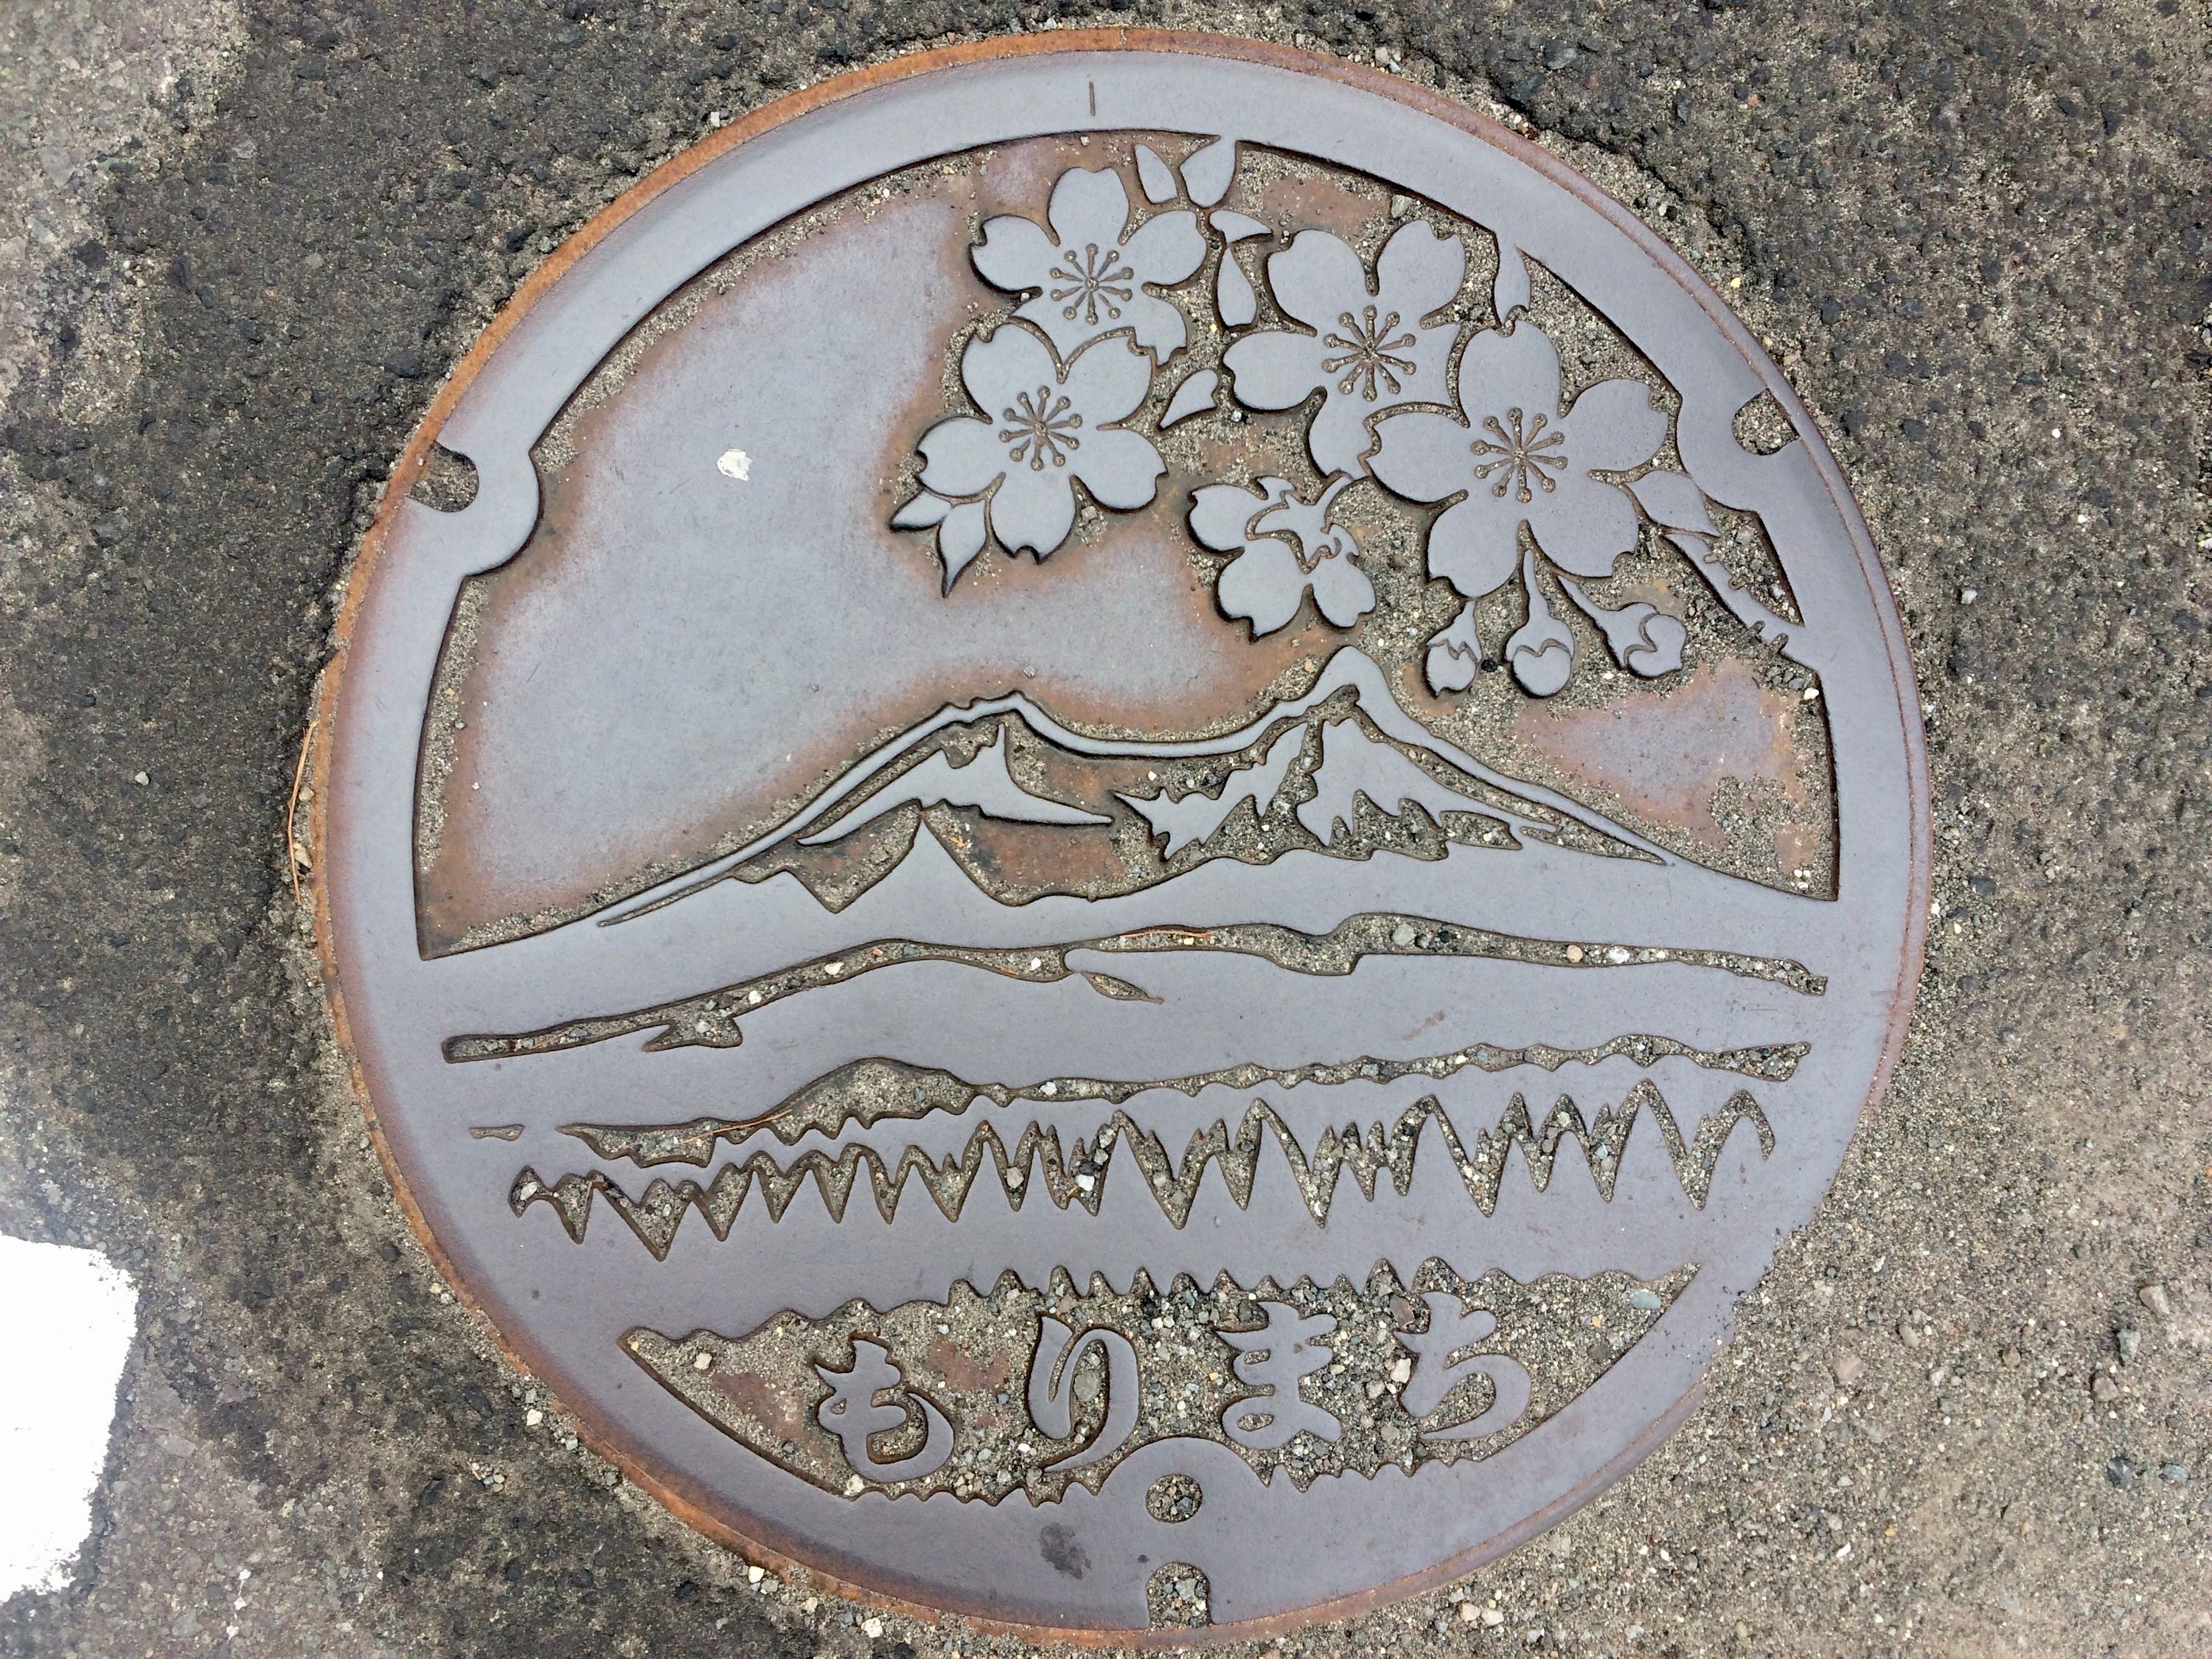 A manhole cover shows Mount Komagatake from another angle.